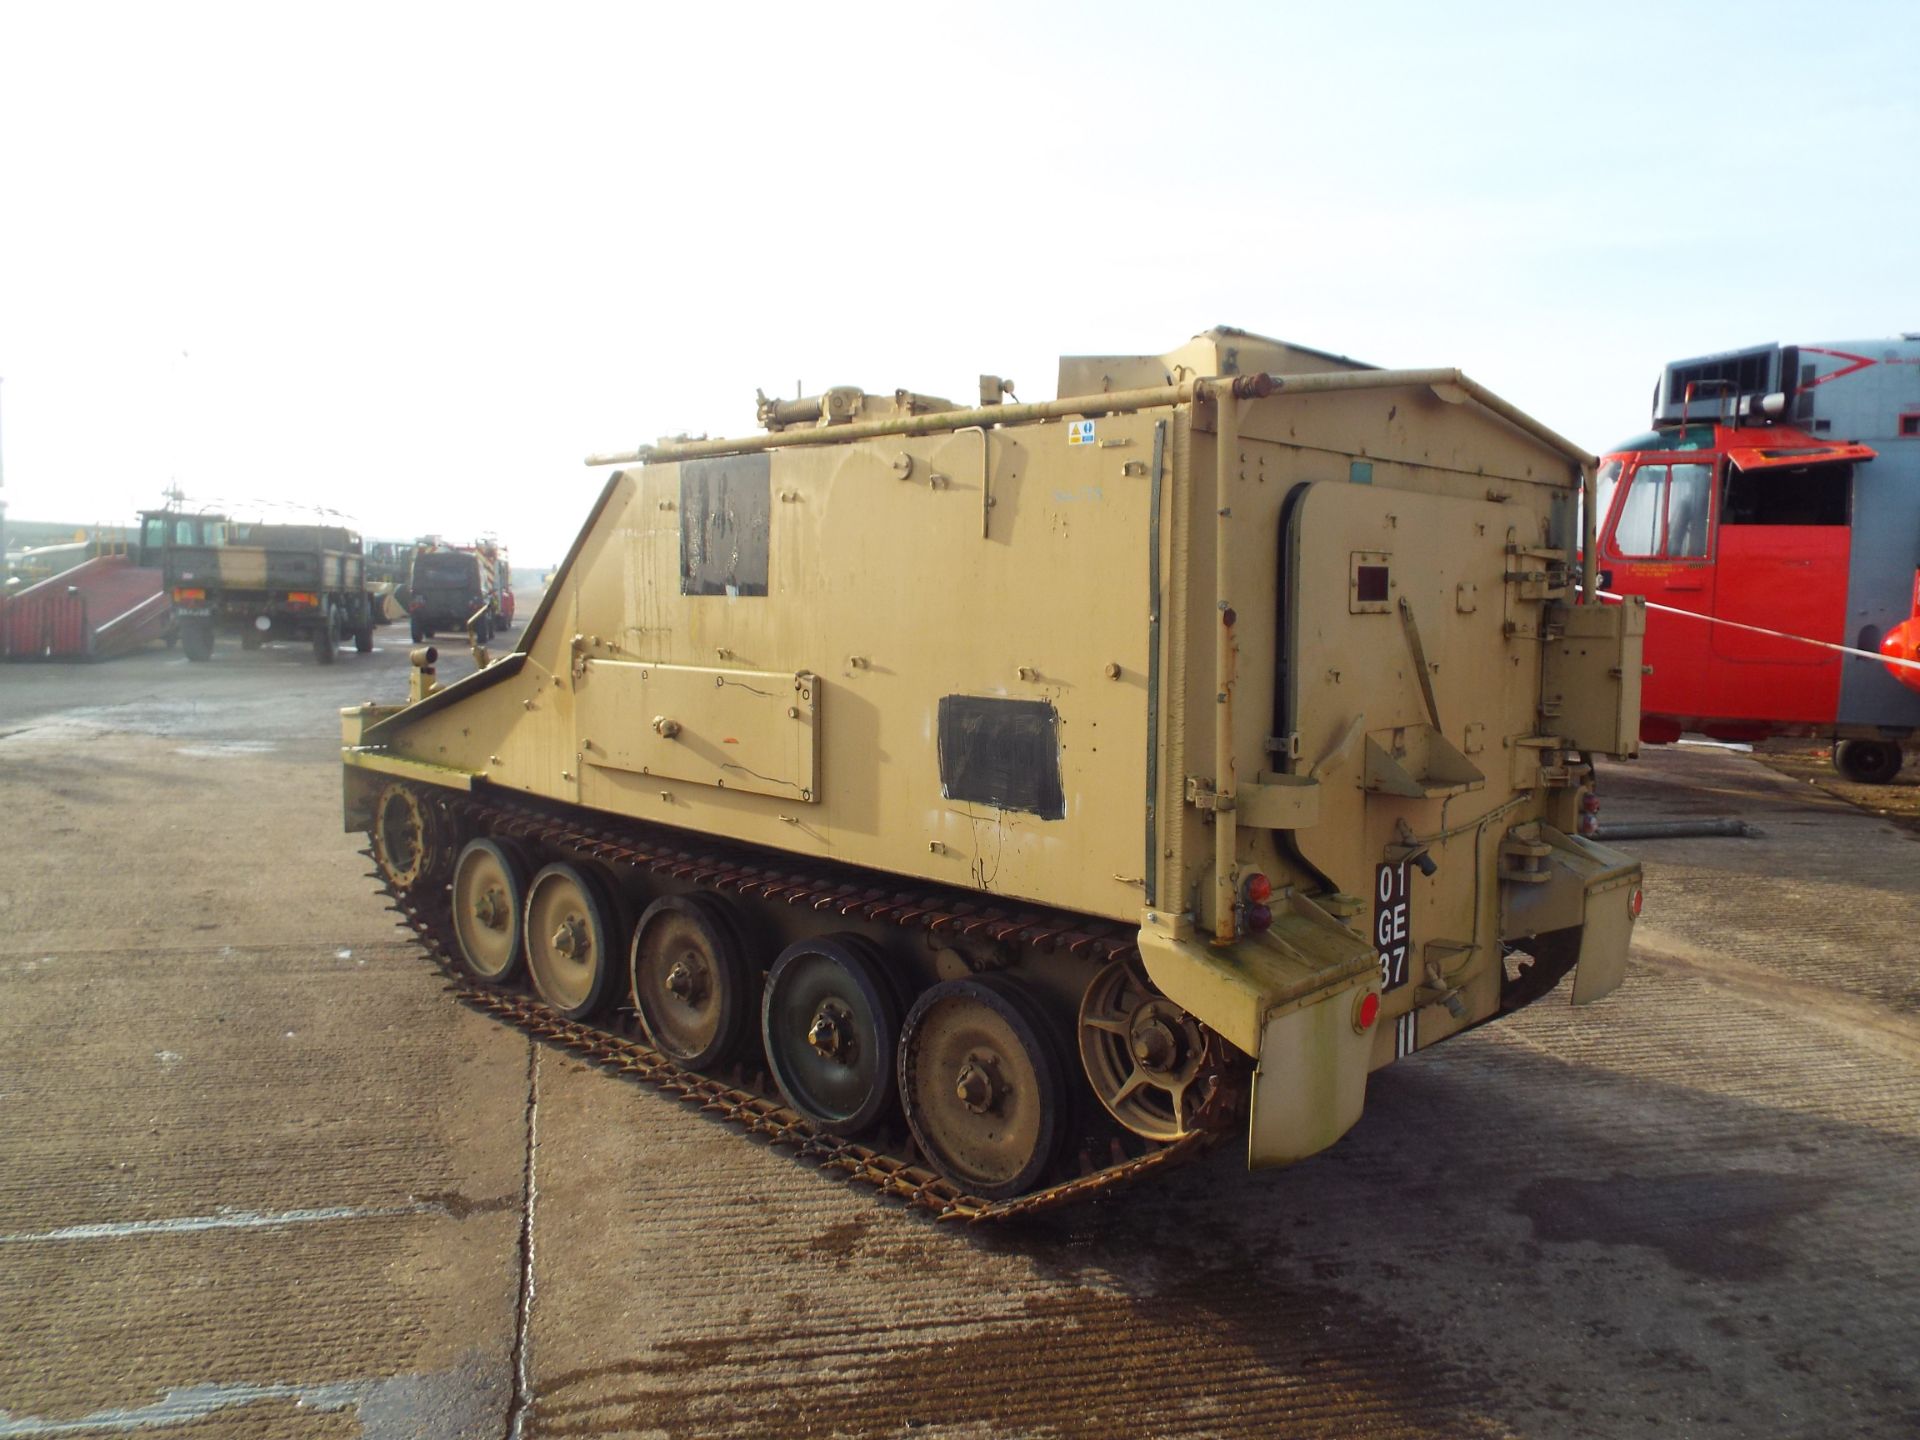 FV105 Sultan Armoured Personnel Carrier - Image 5 of 28